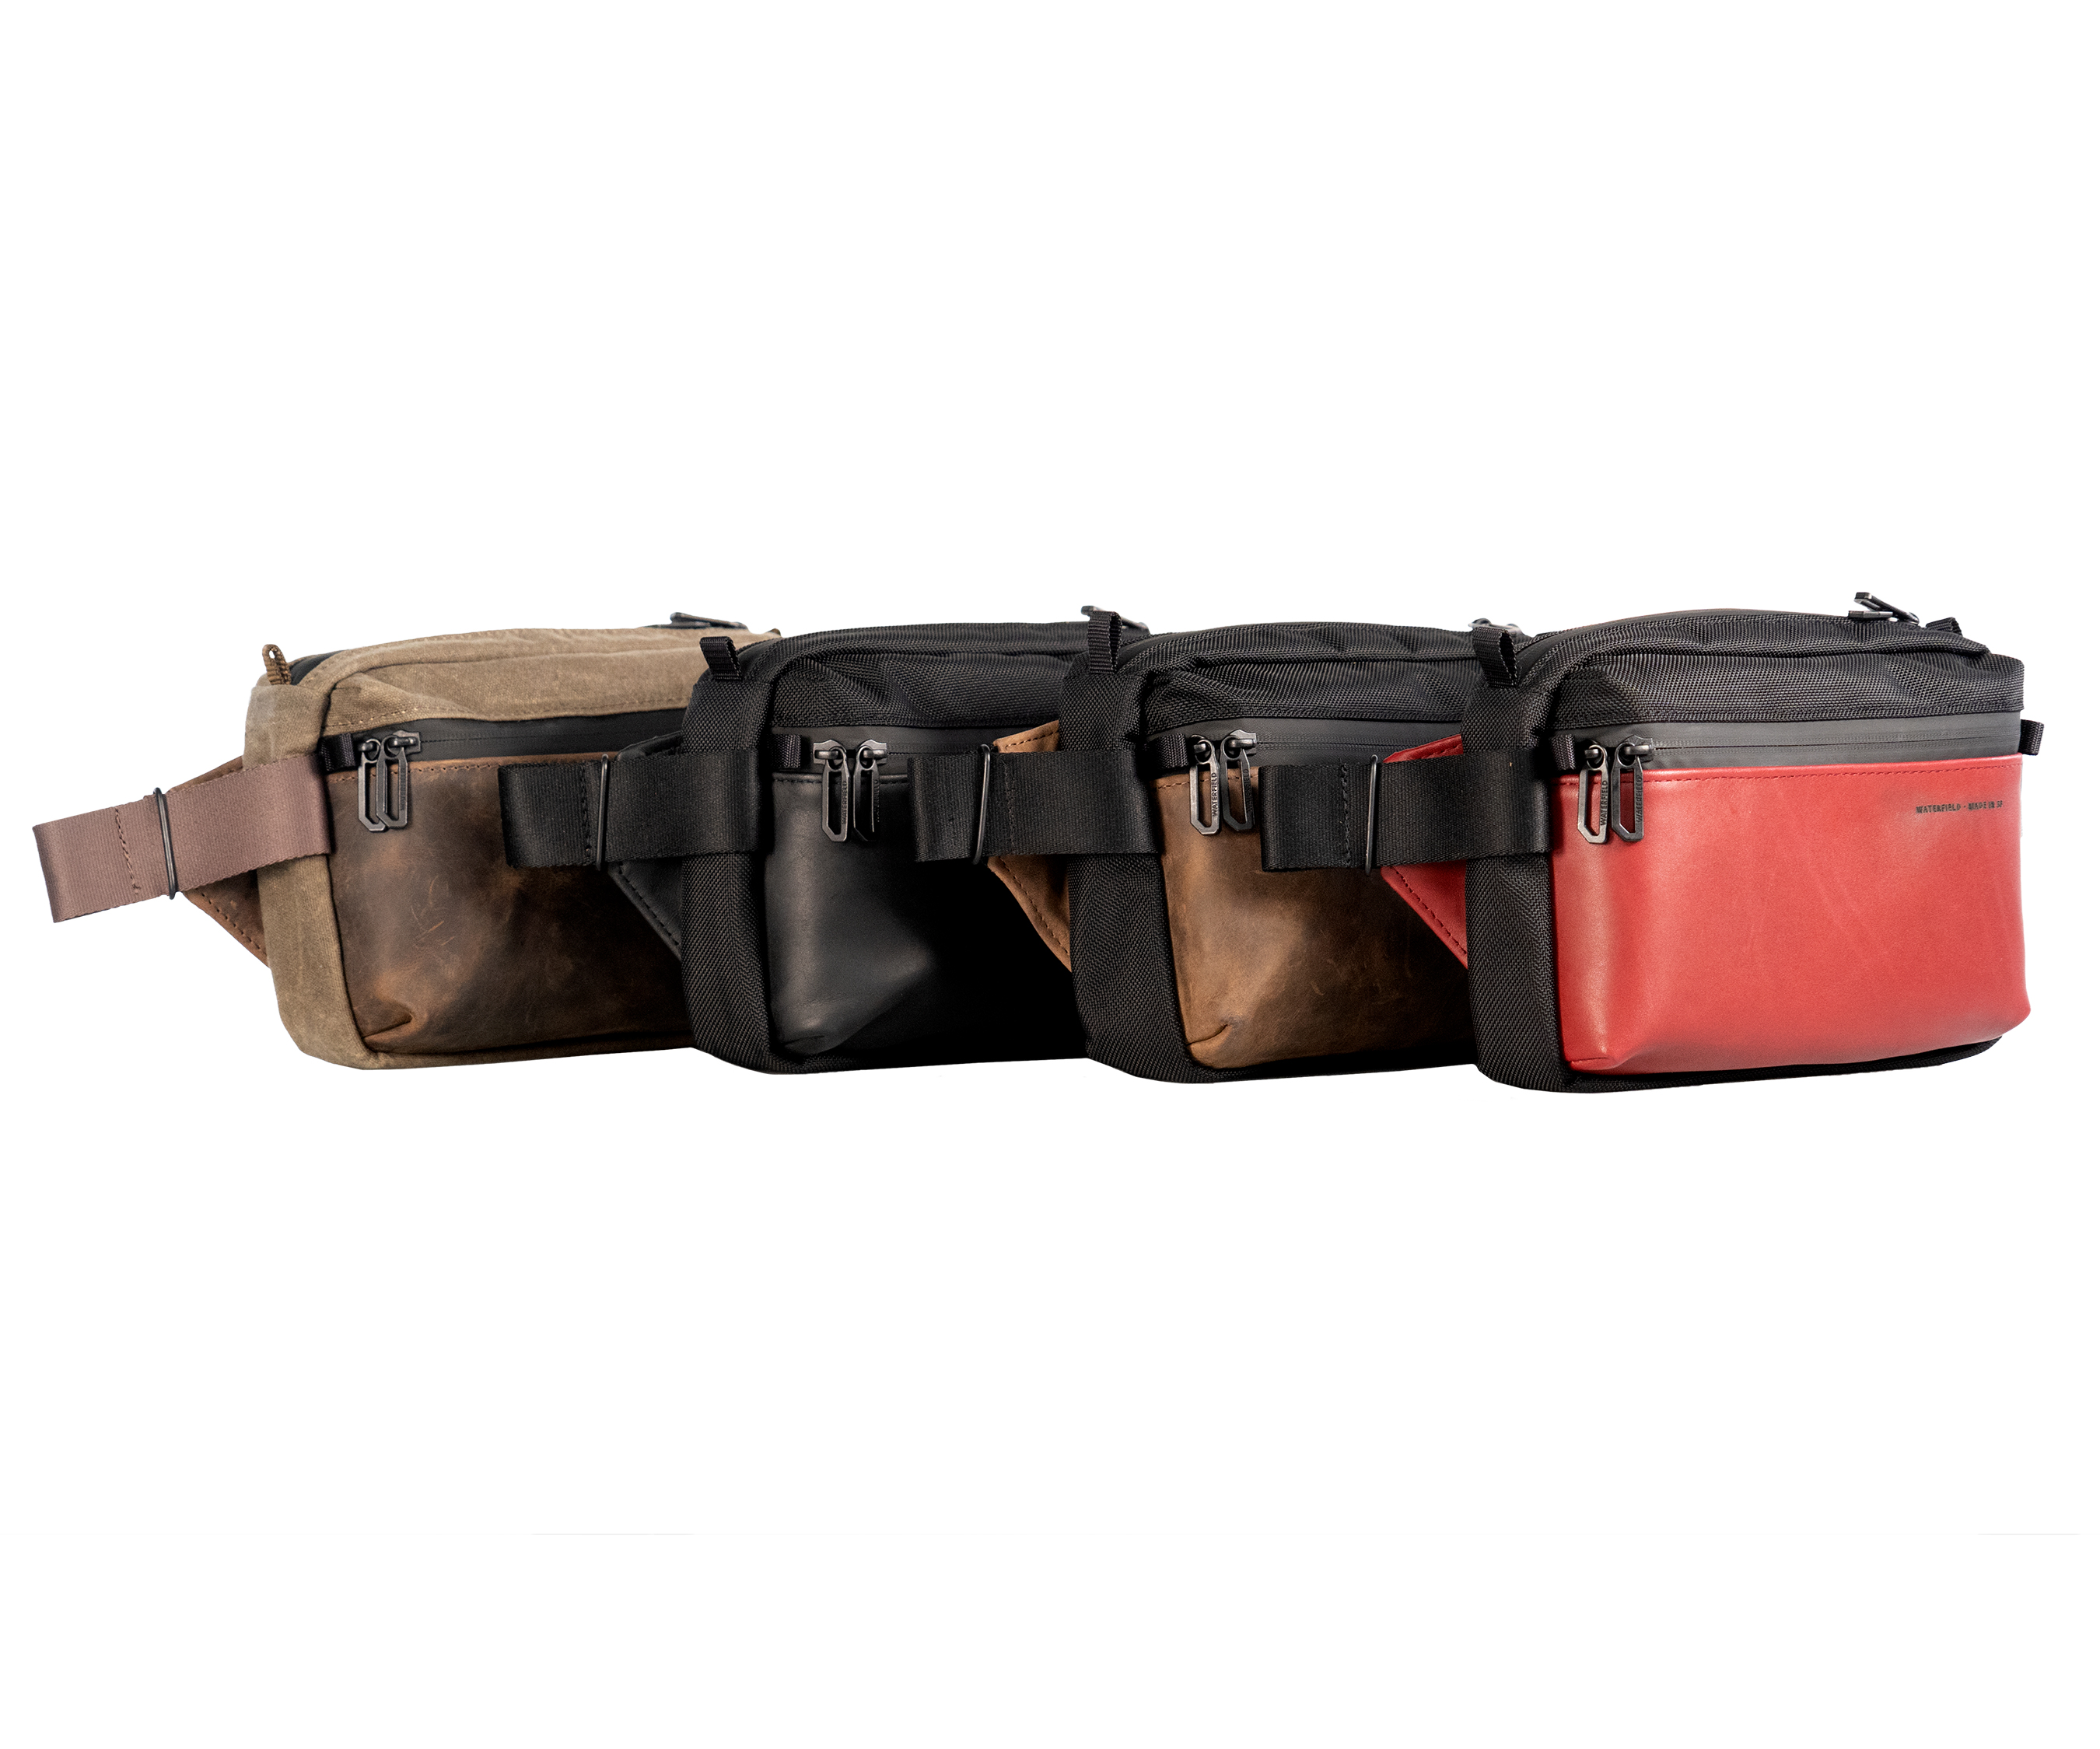 Compact Hip Sling Bag in a sampling of color choices